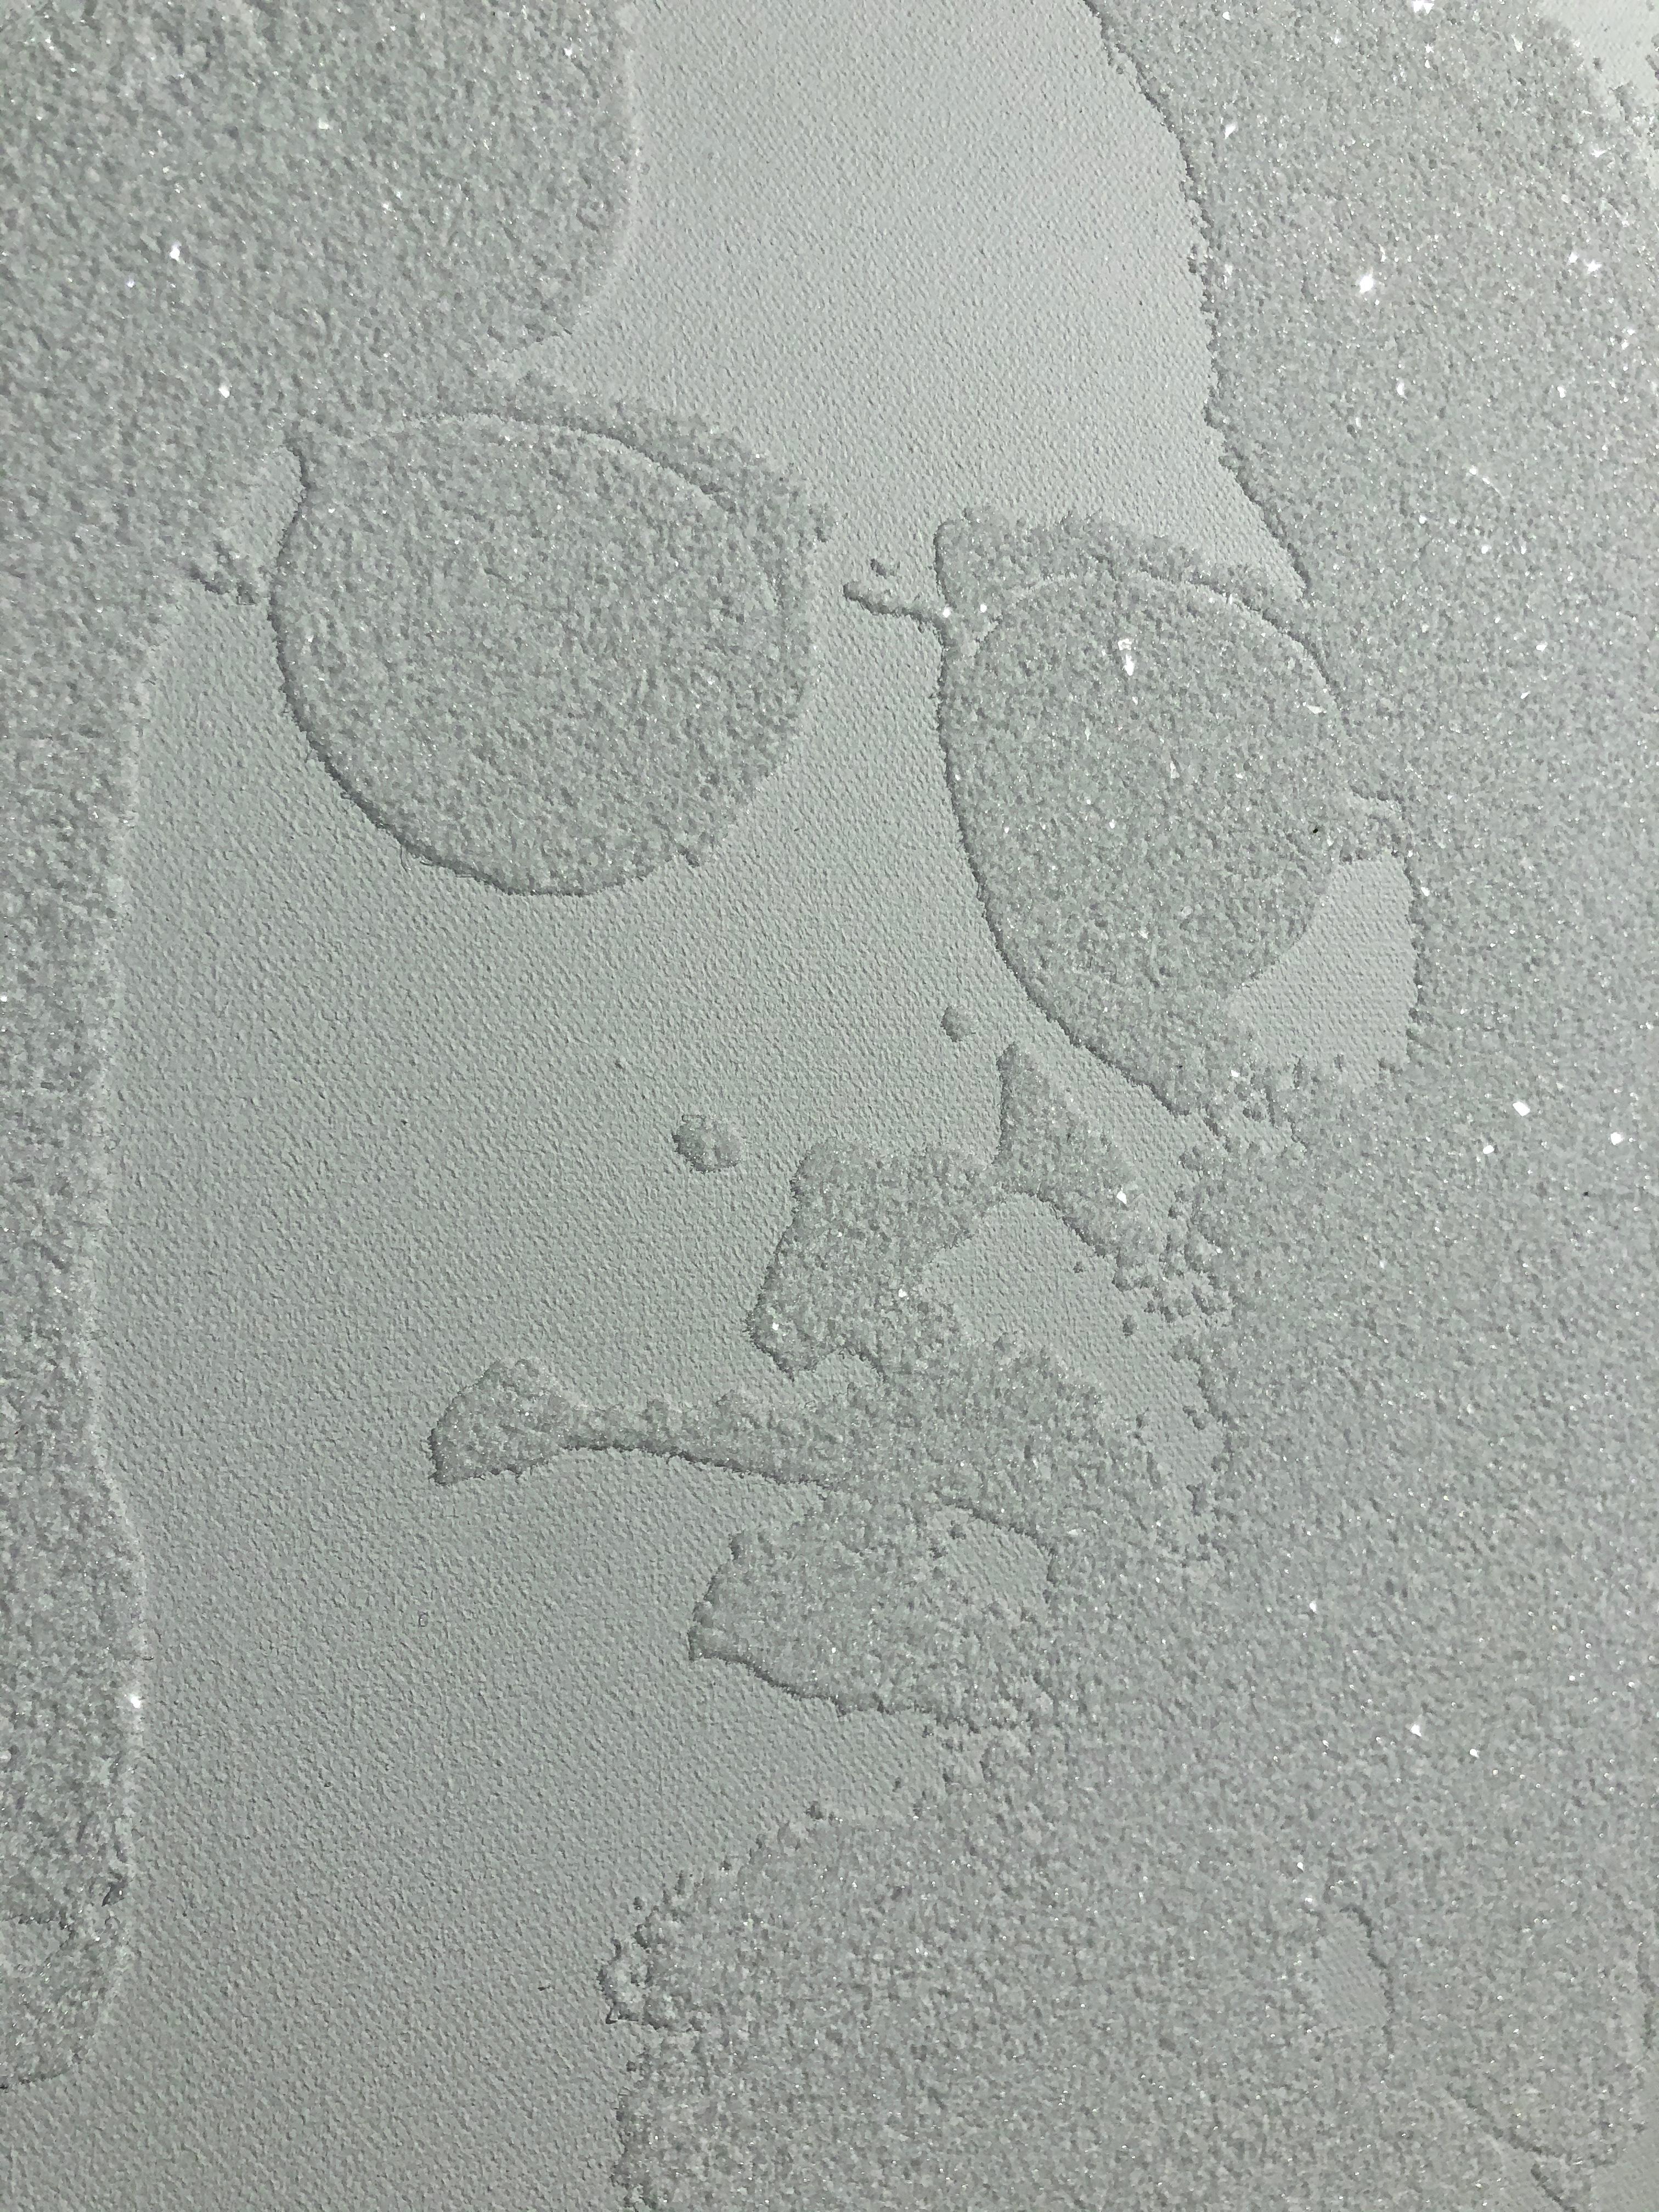 Working Class Hero - Lennon NYC - White Diamonds on Canvas - 1/1 - Contemporary Mixed Media Art by Plastic Jesus